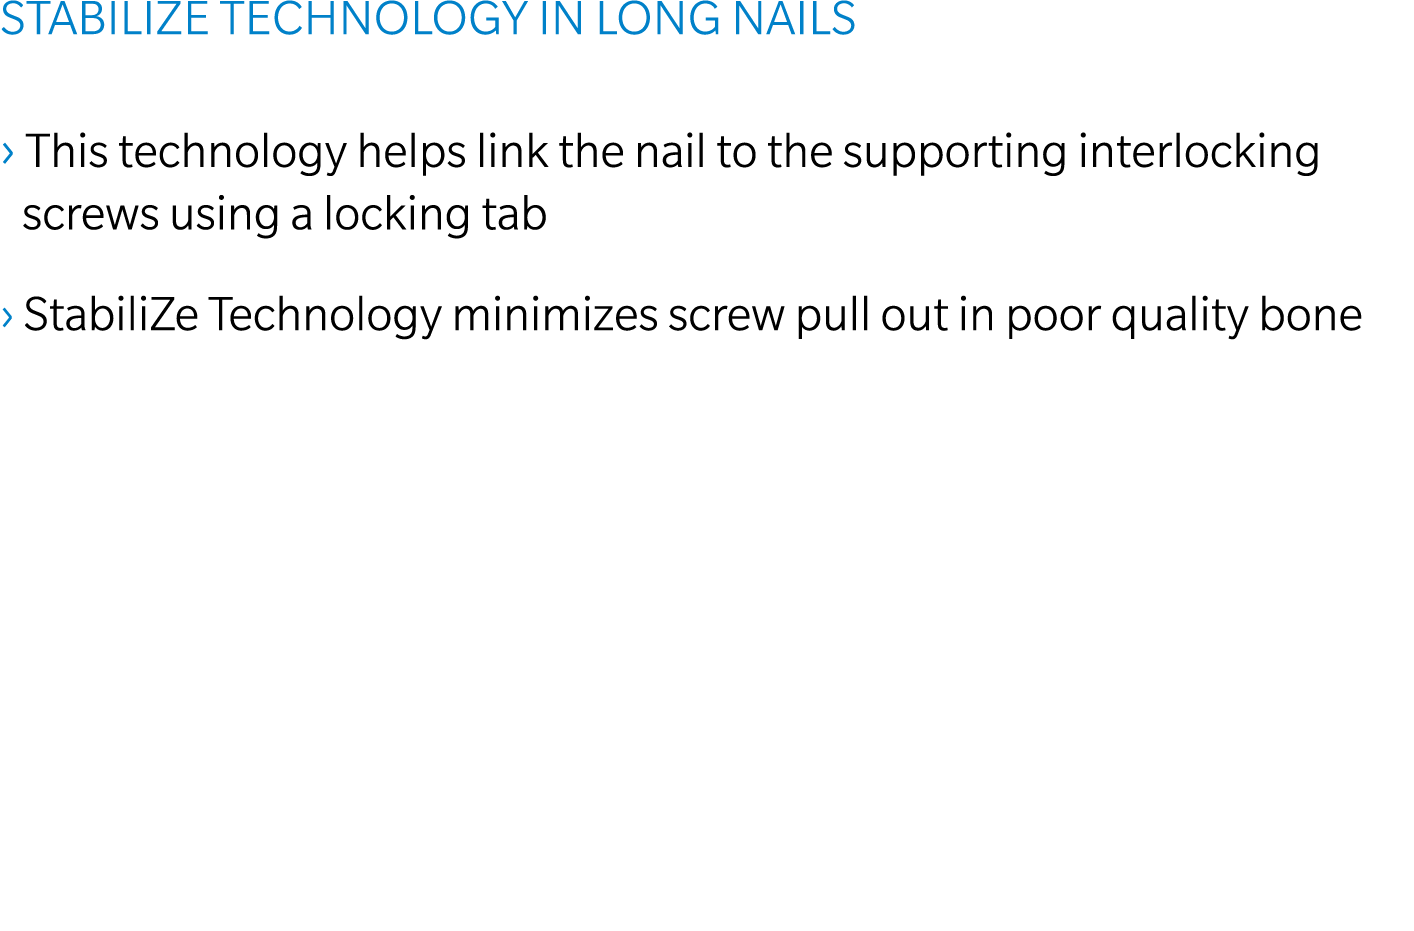 StabiliZe Technology in long nails › This technology helps link the nail to the supporting interlocking screws using ...